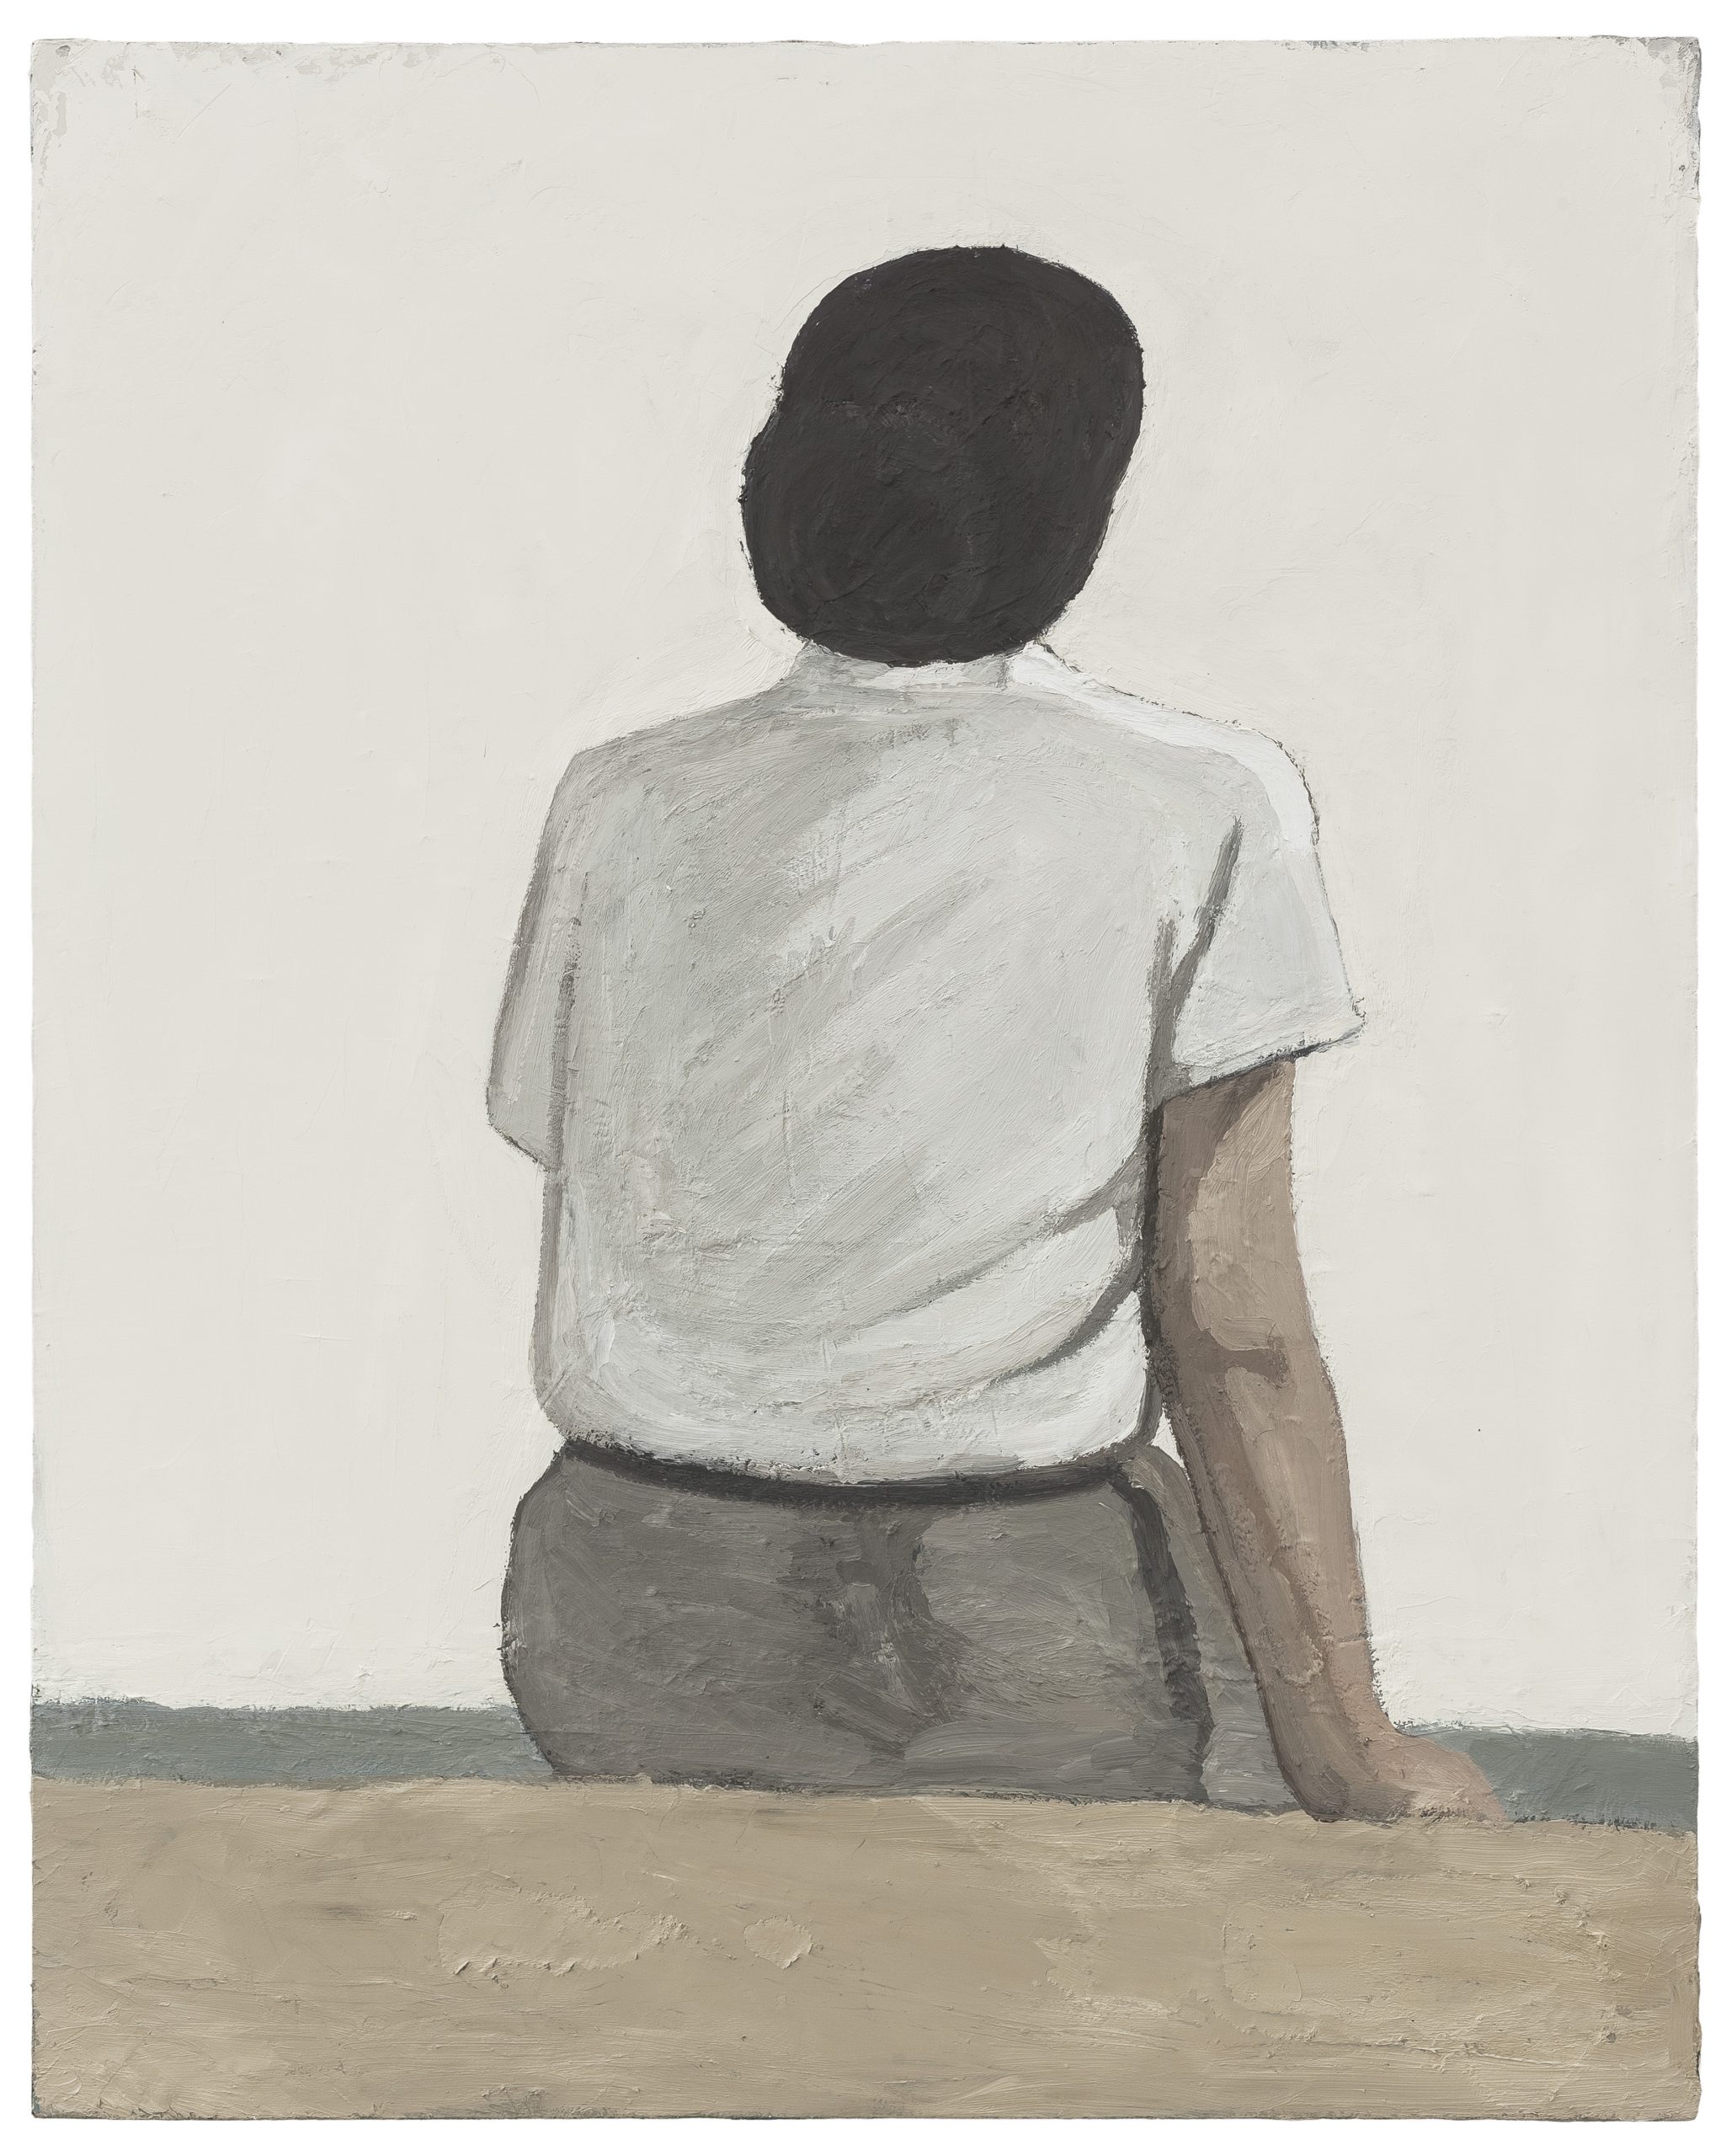 Untitled – Sitting Position at Seaside No.4